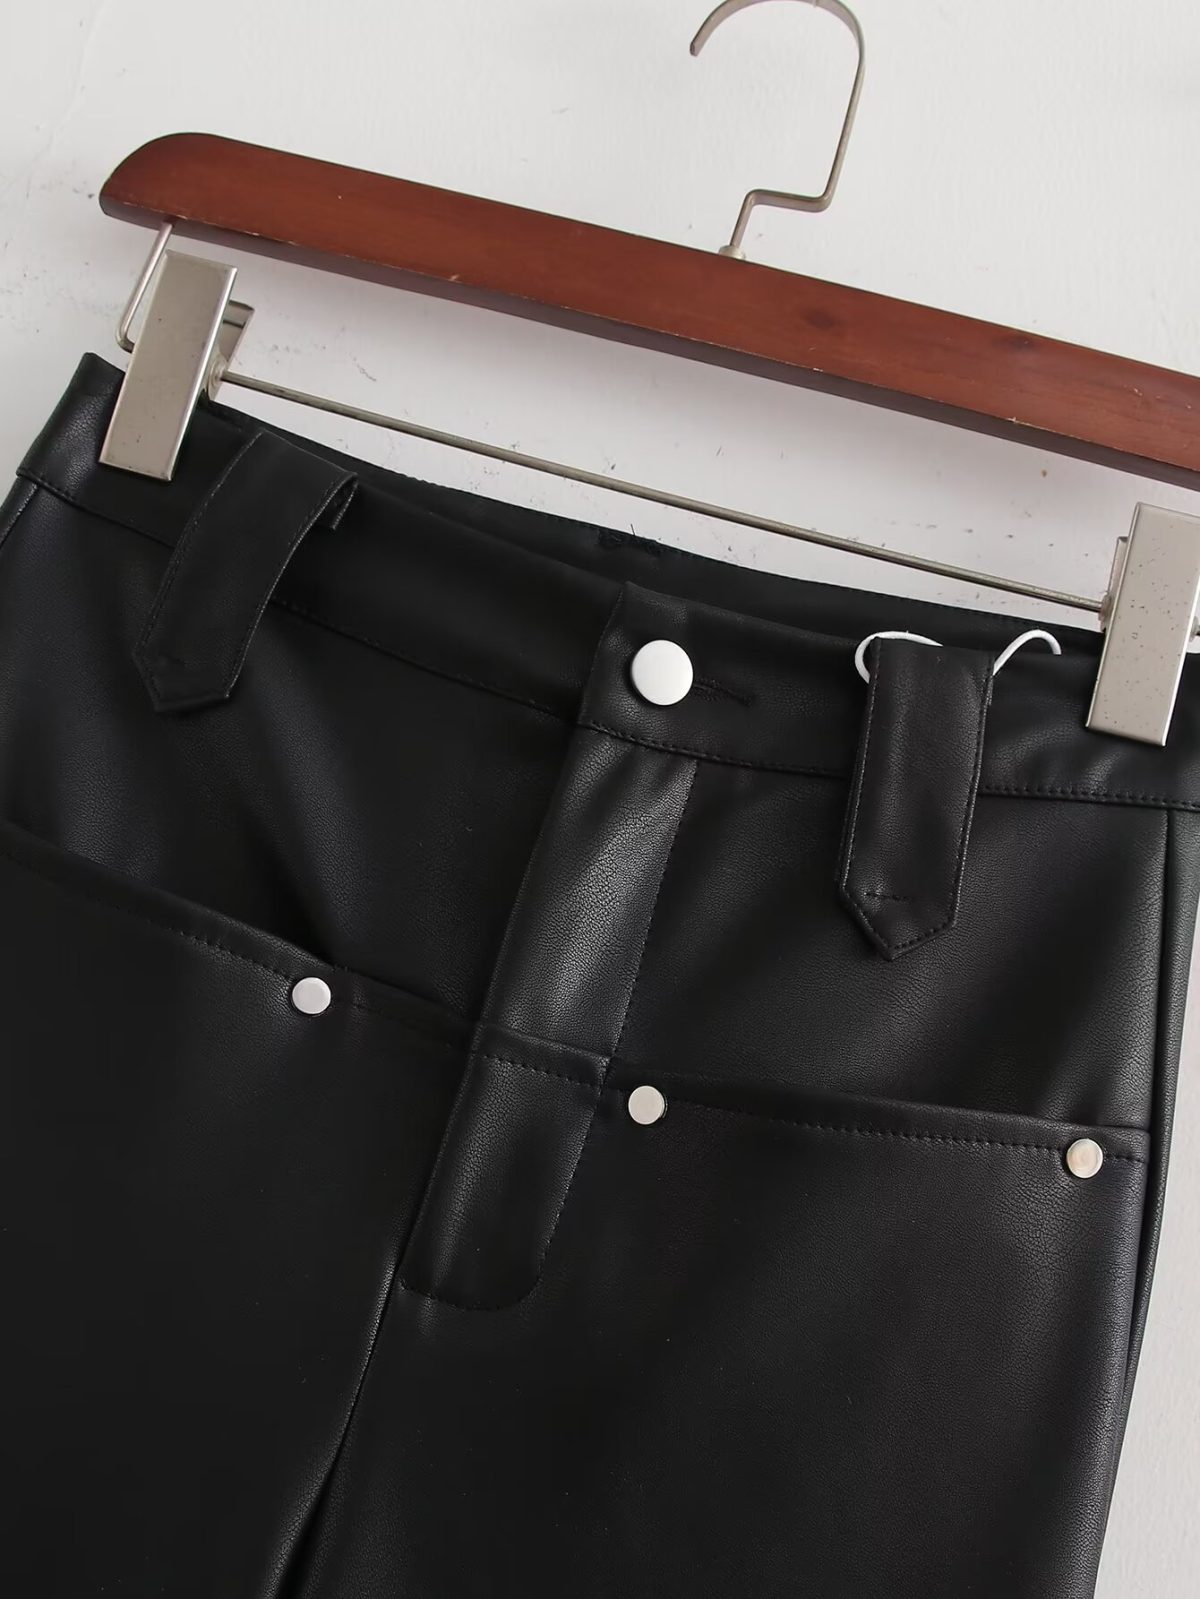 Office High Waist Straight Leather Wide Leg Pants in Pants